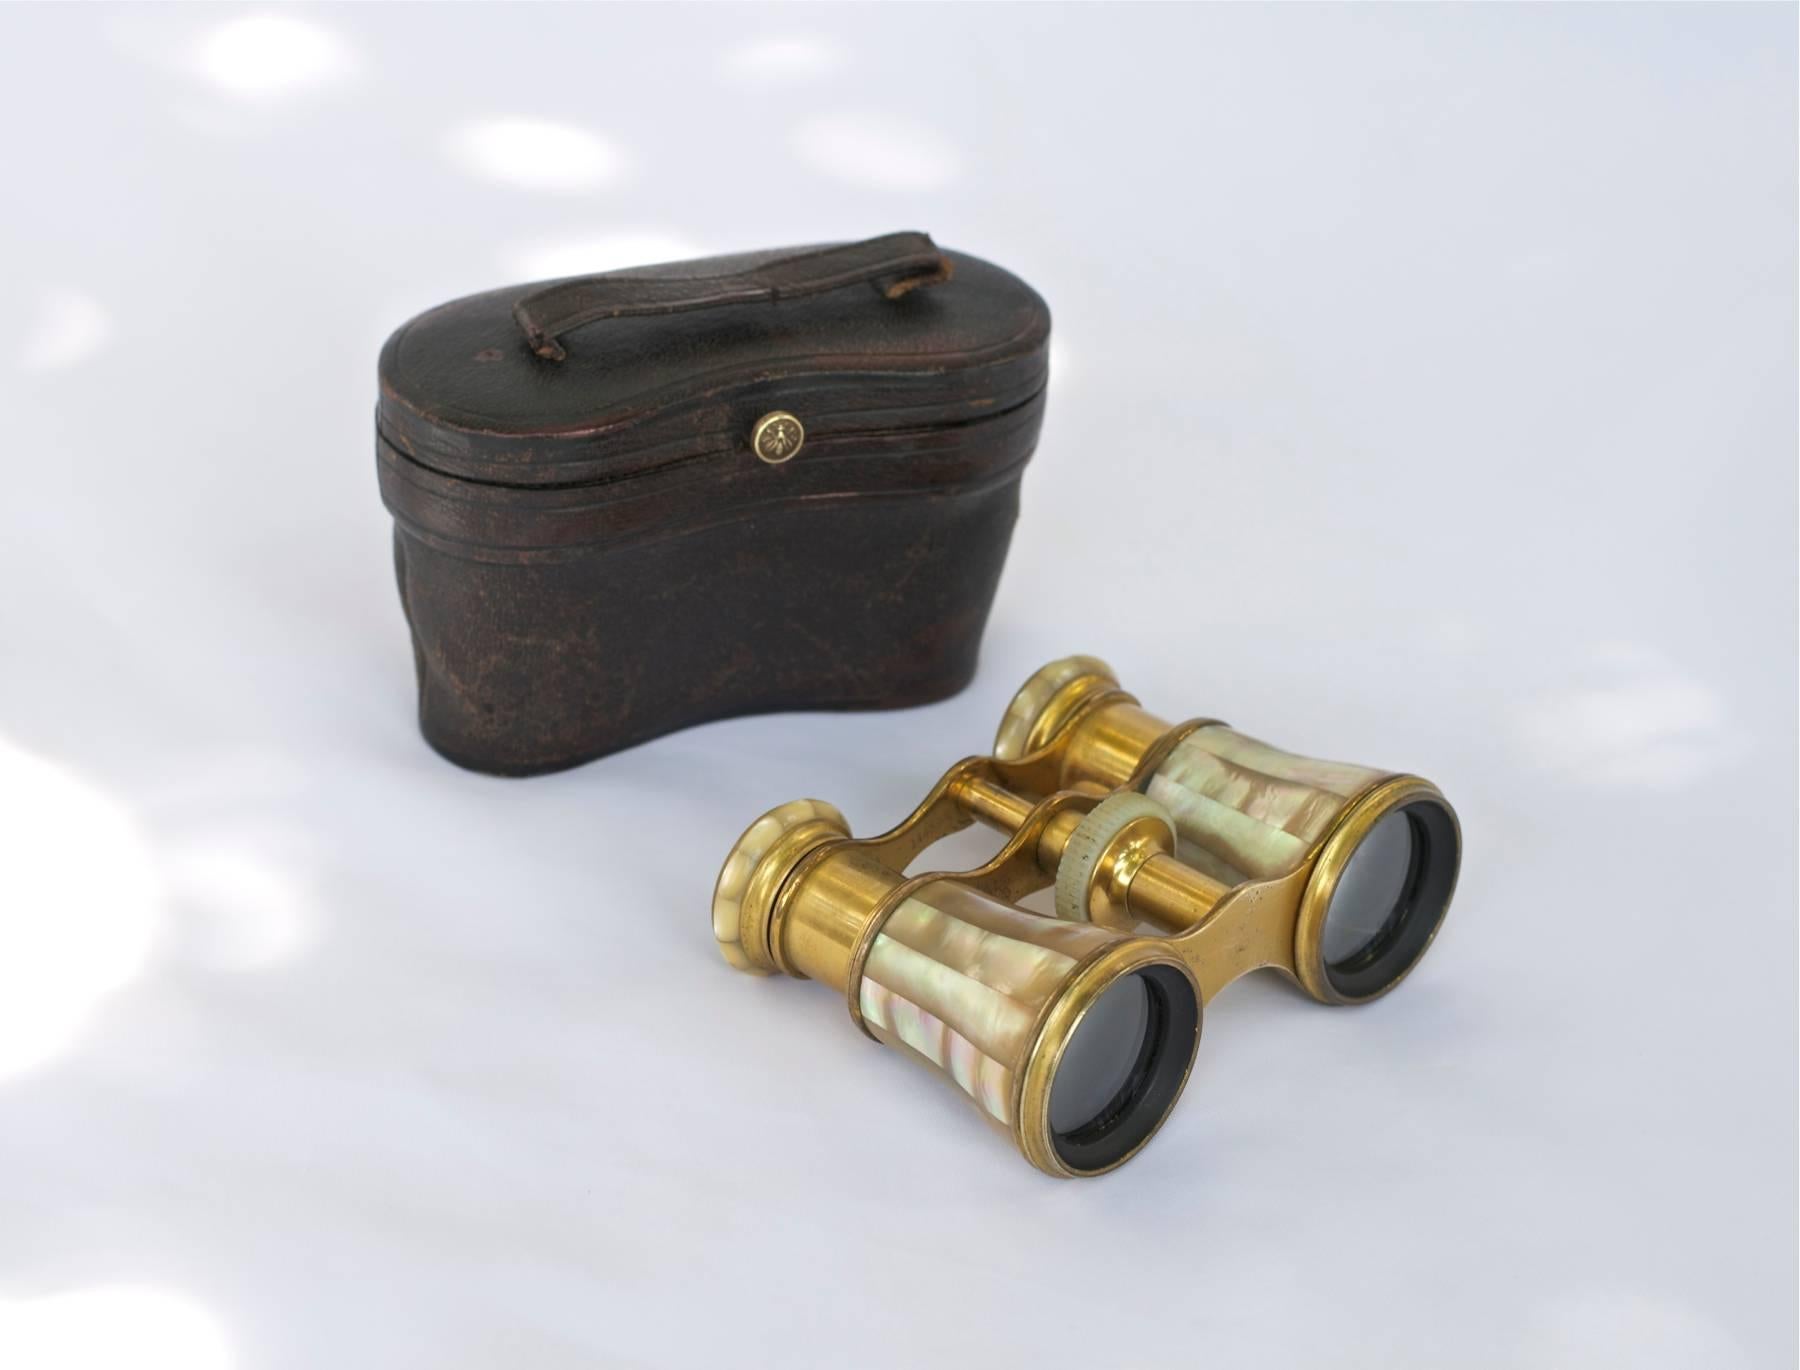 High quality pair of French opera glasses of brass, gilt bronze and mother-of-pearl. Original leather case. Case is lined with a rust colored velvet with gold stitching as an accent. Lenses are very clean throughout and are 100 percent functional.